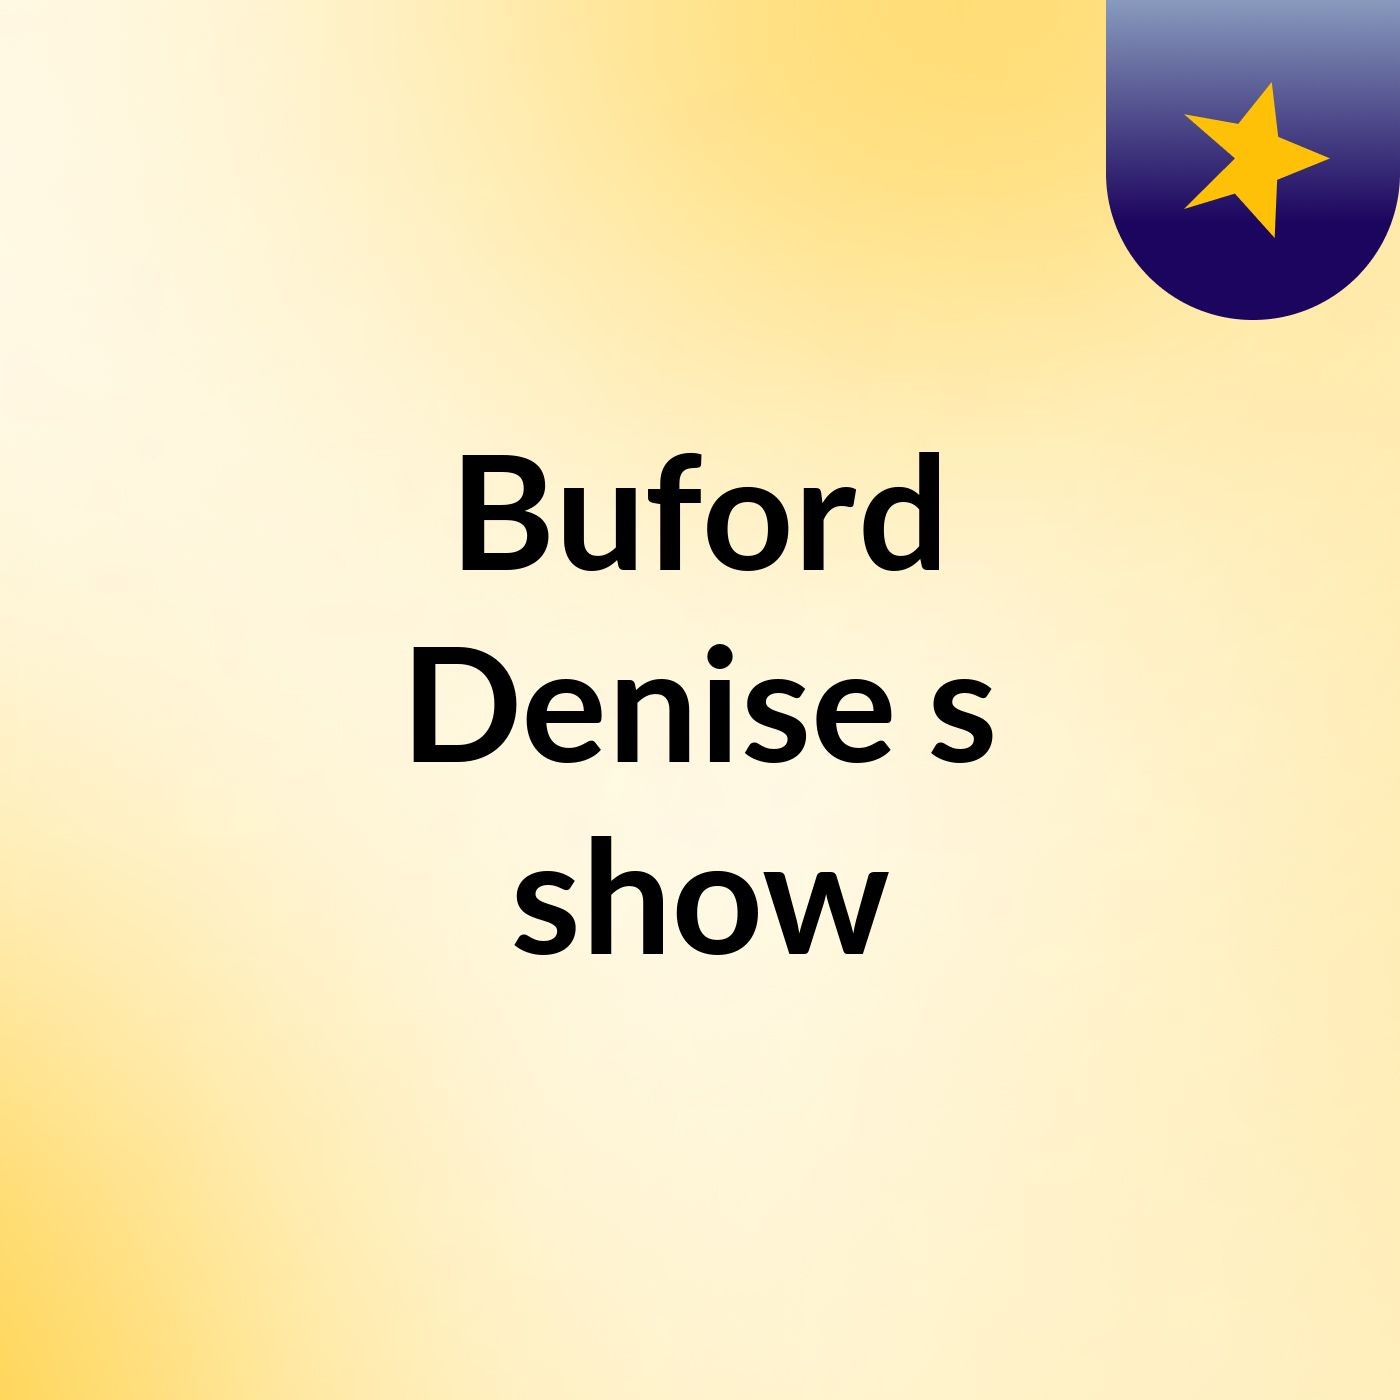 Buford Denise's show